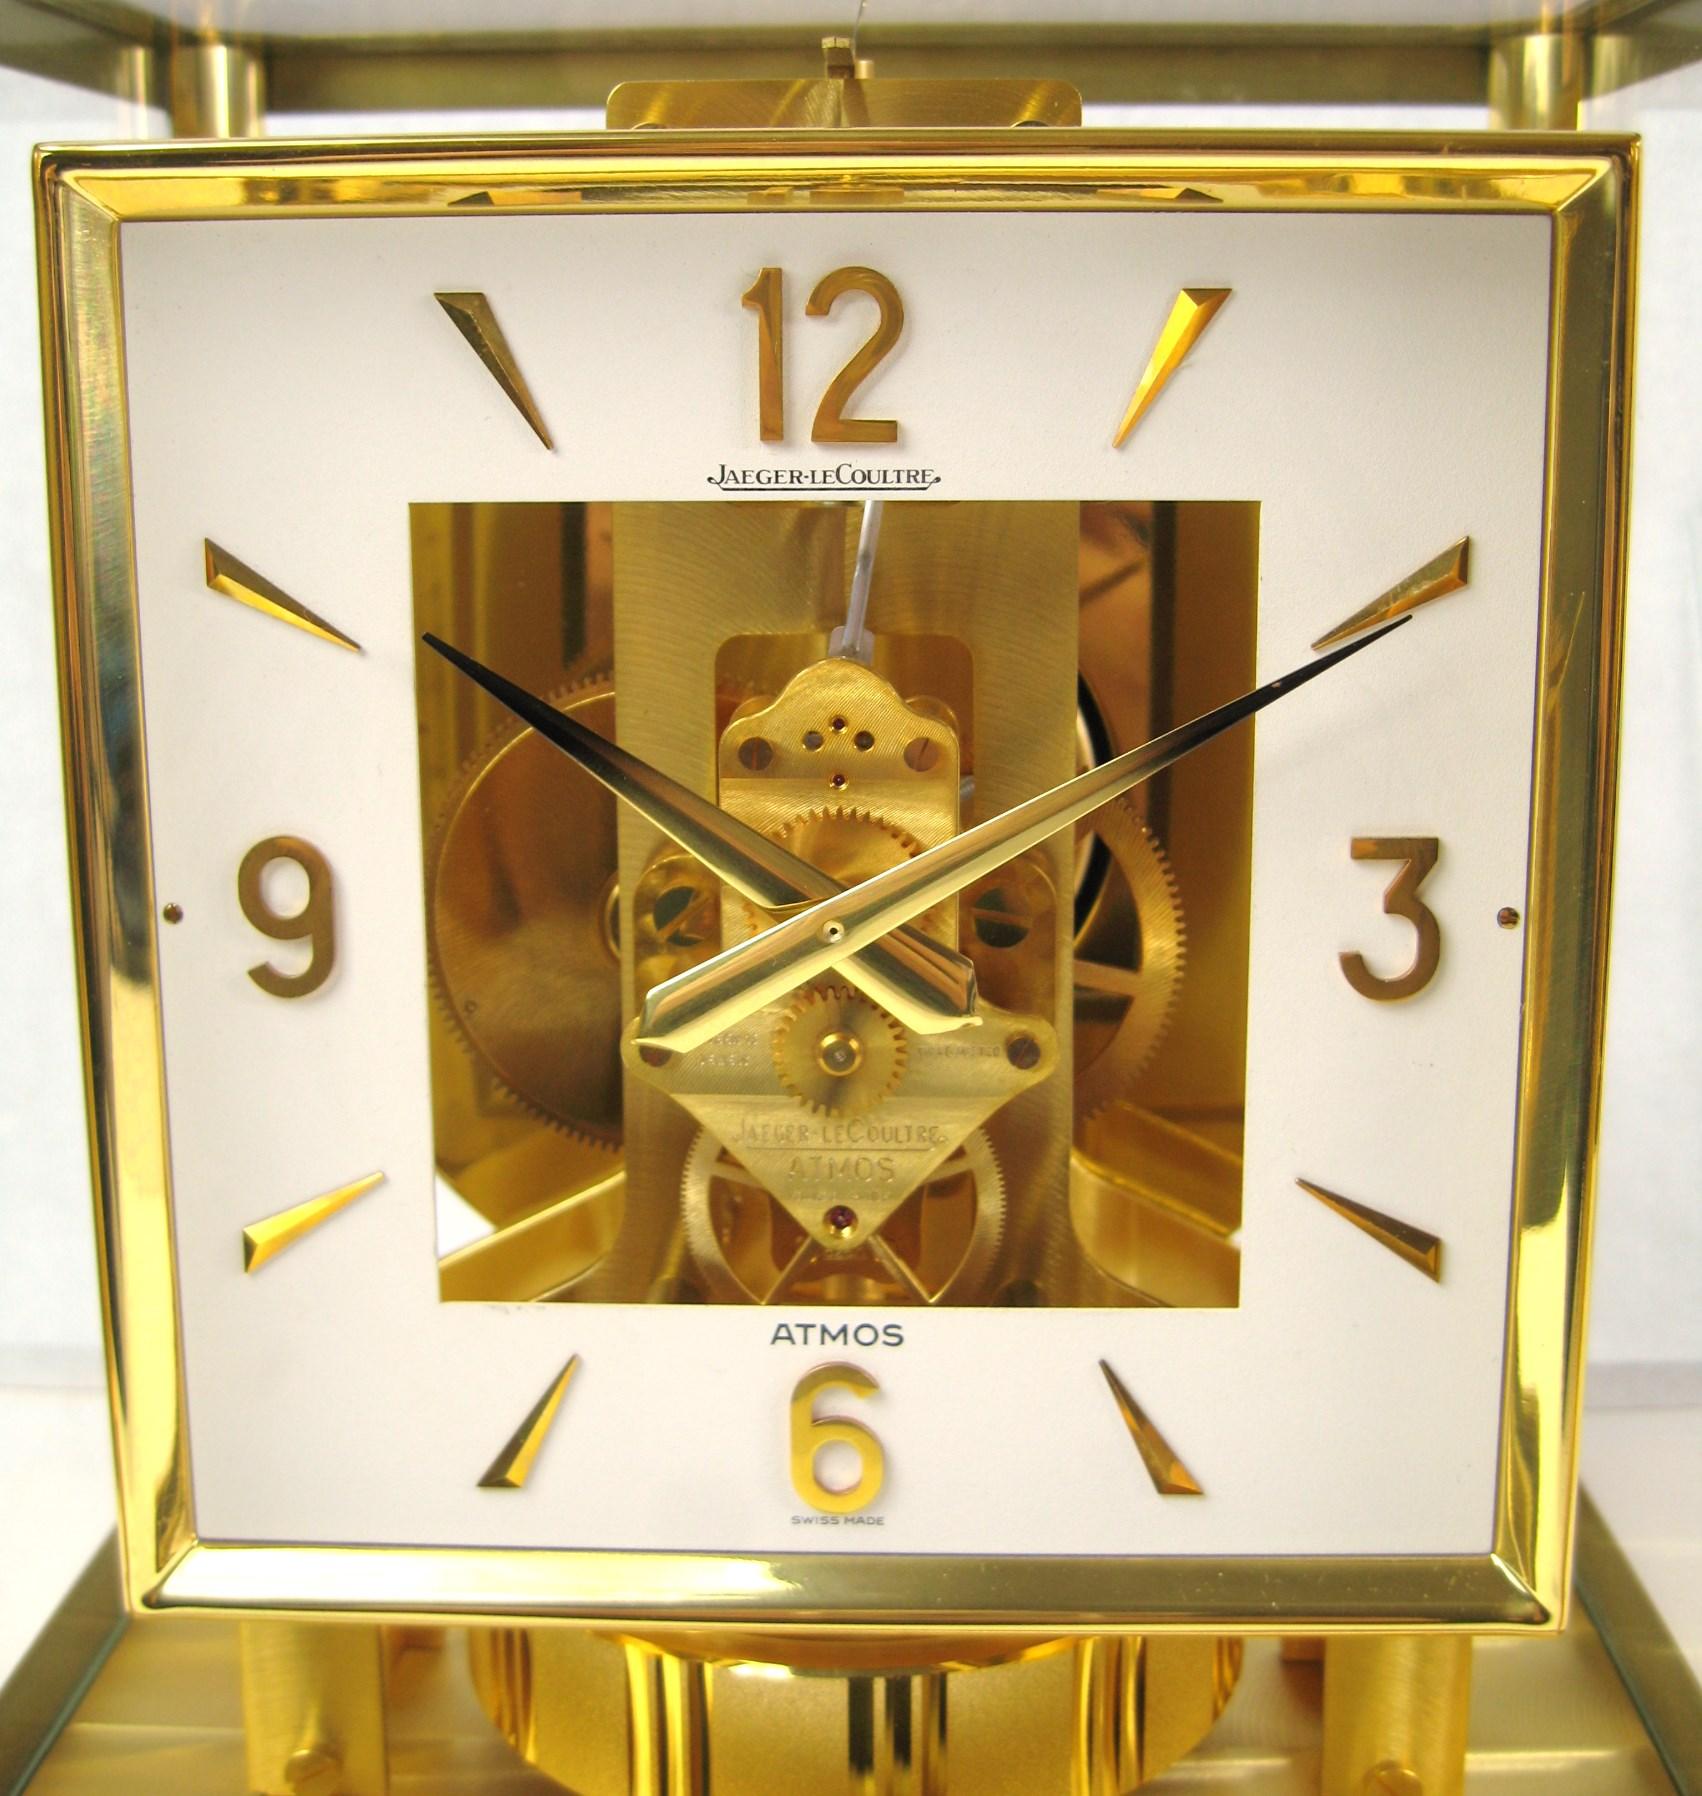 Jaeger Lecoultre Atmos Clock
Table clock It works correctly. perpetual motion, Caliber 528-8
The dial is square, Materials Gold Plated Brass and glass
The patina is golden and has some minor natural wear overall condition is Great with 1 small split